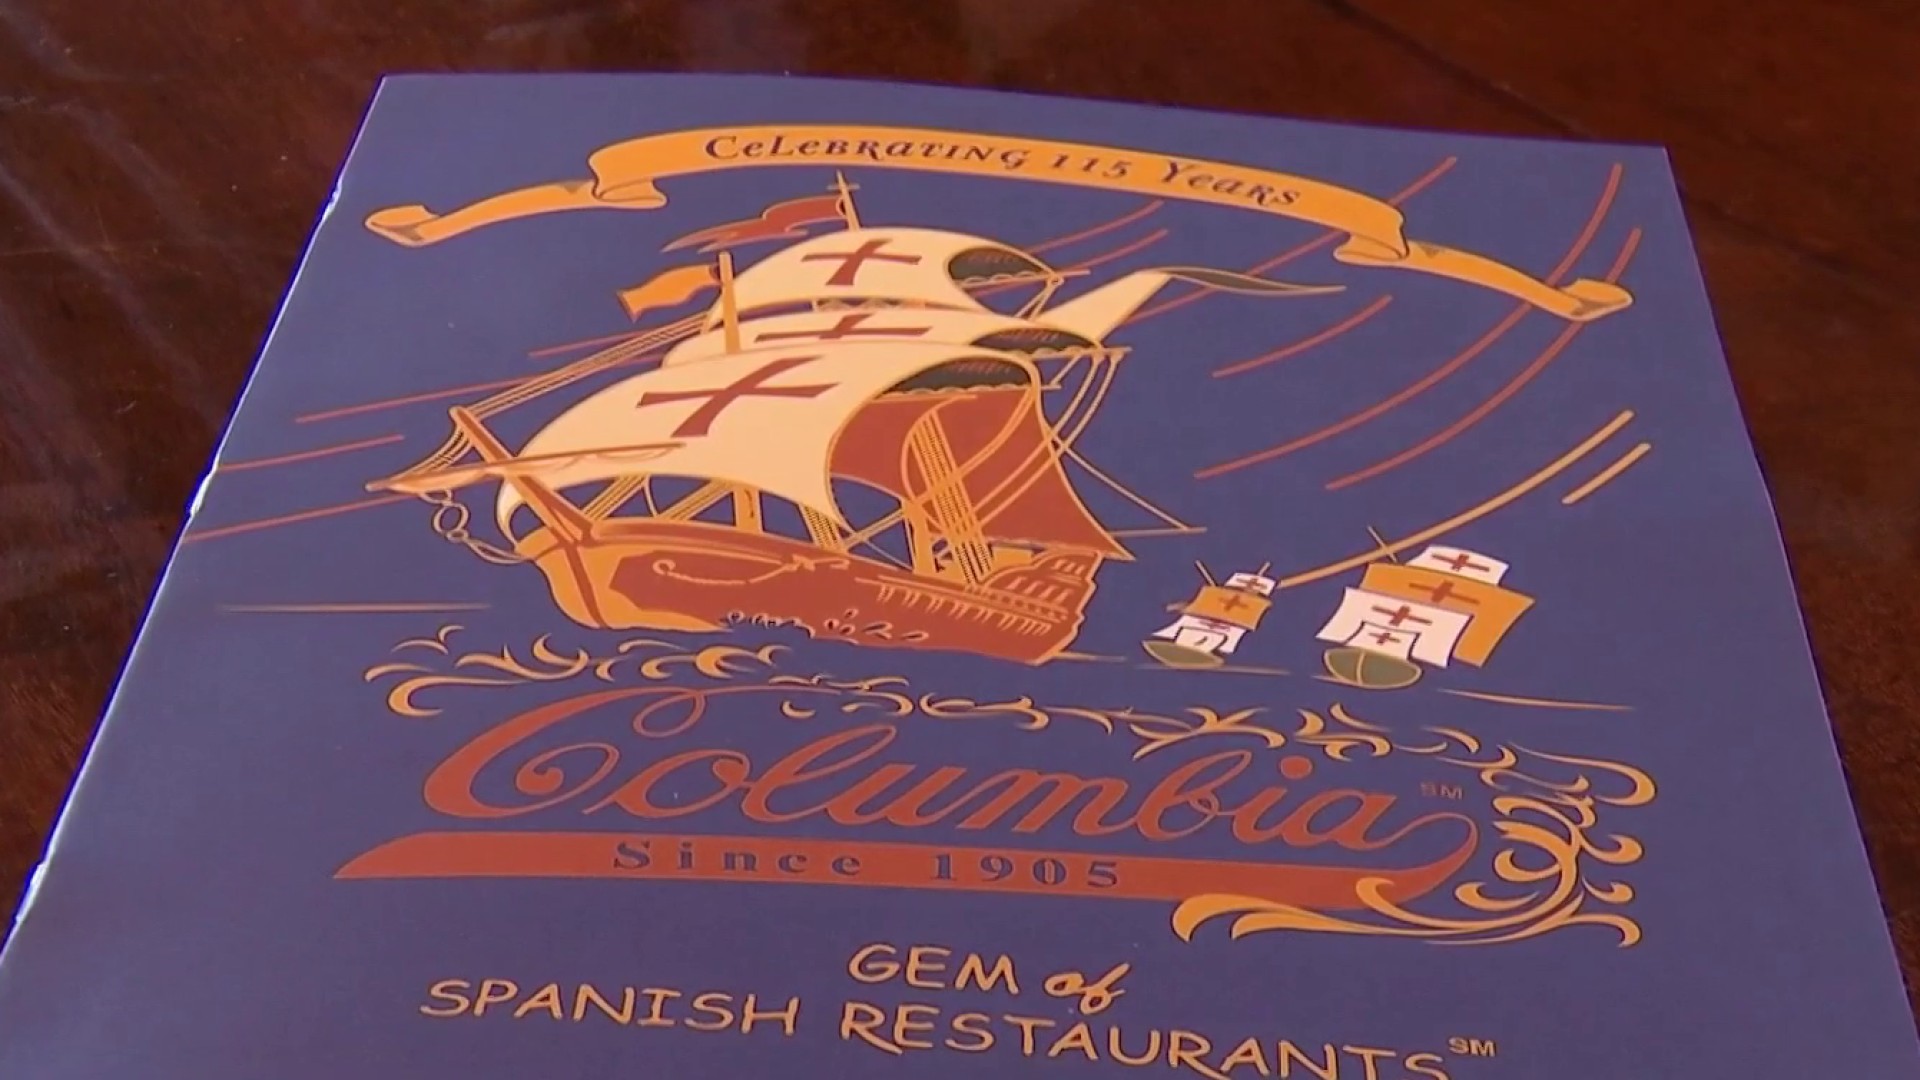 Florida S Oldest Restaurant Also Holds The Title For Largest Spanish Restaurant In U S